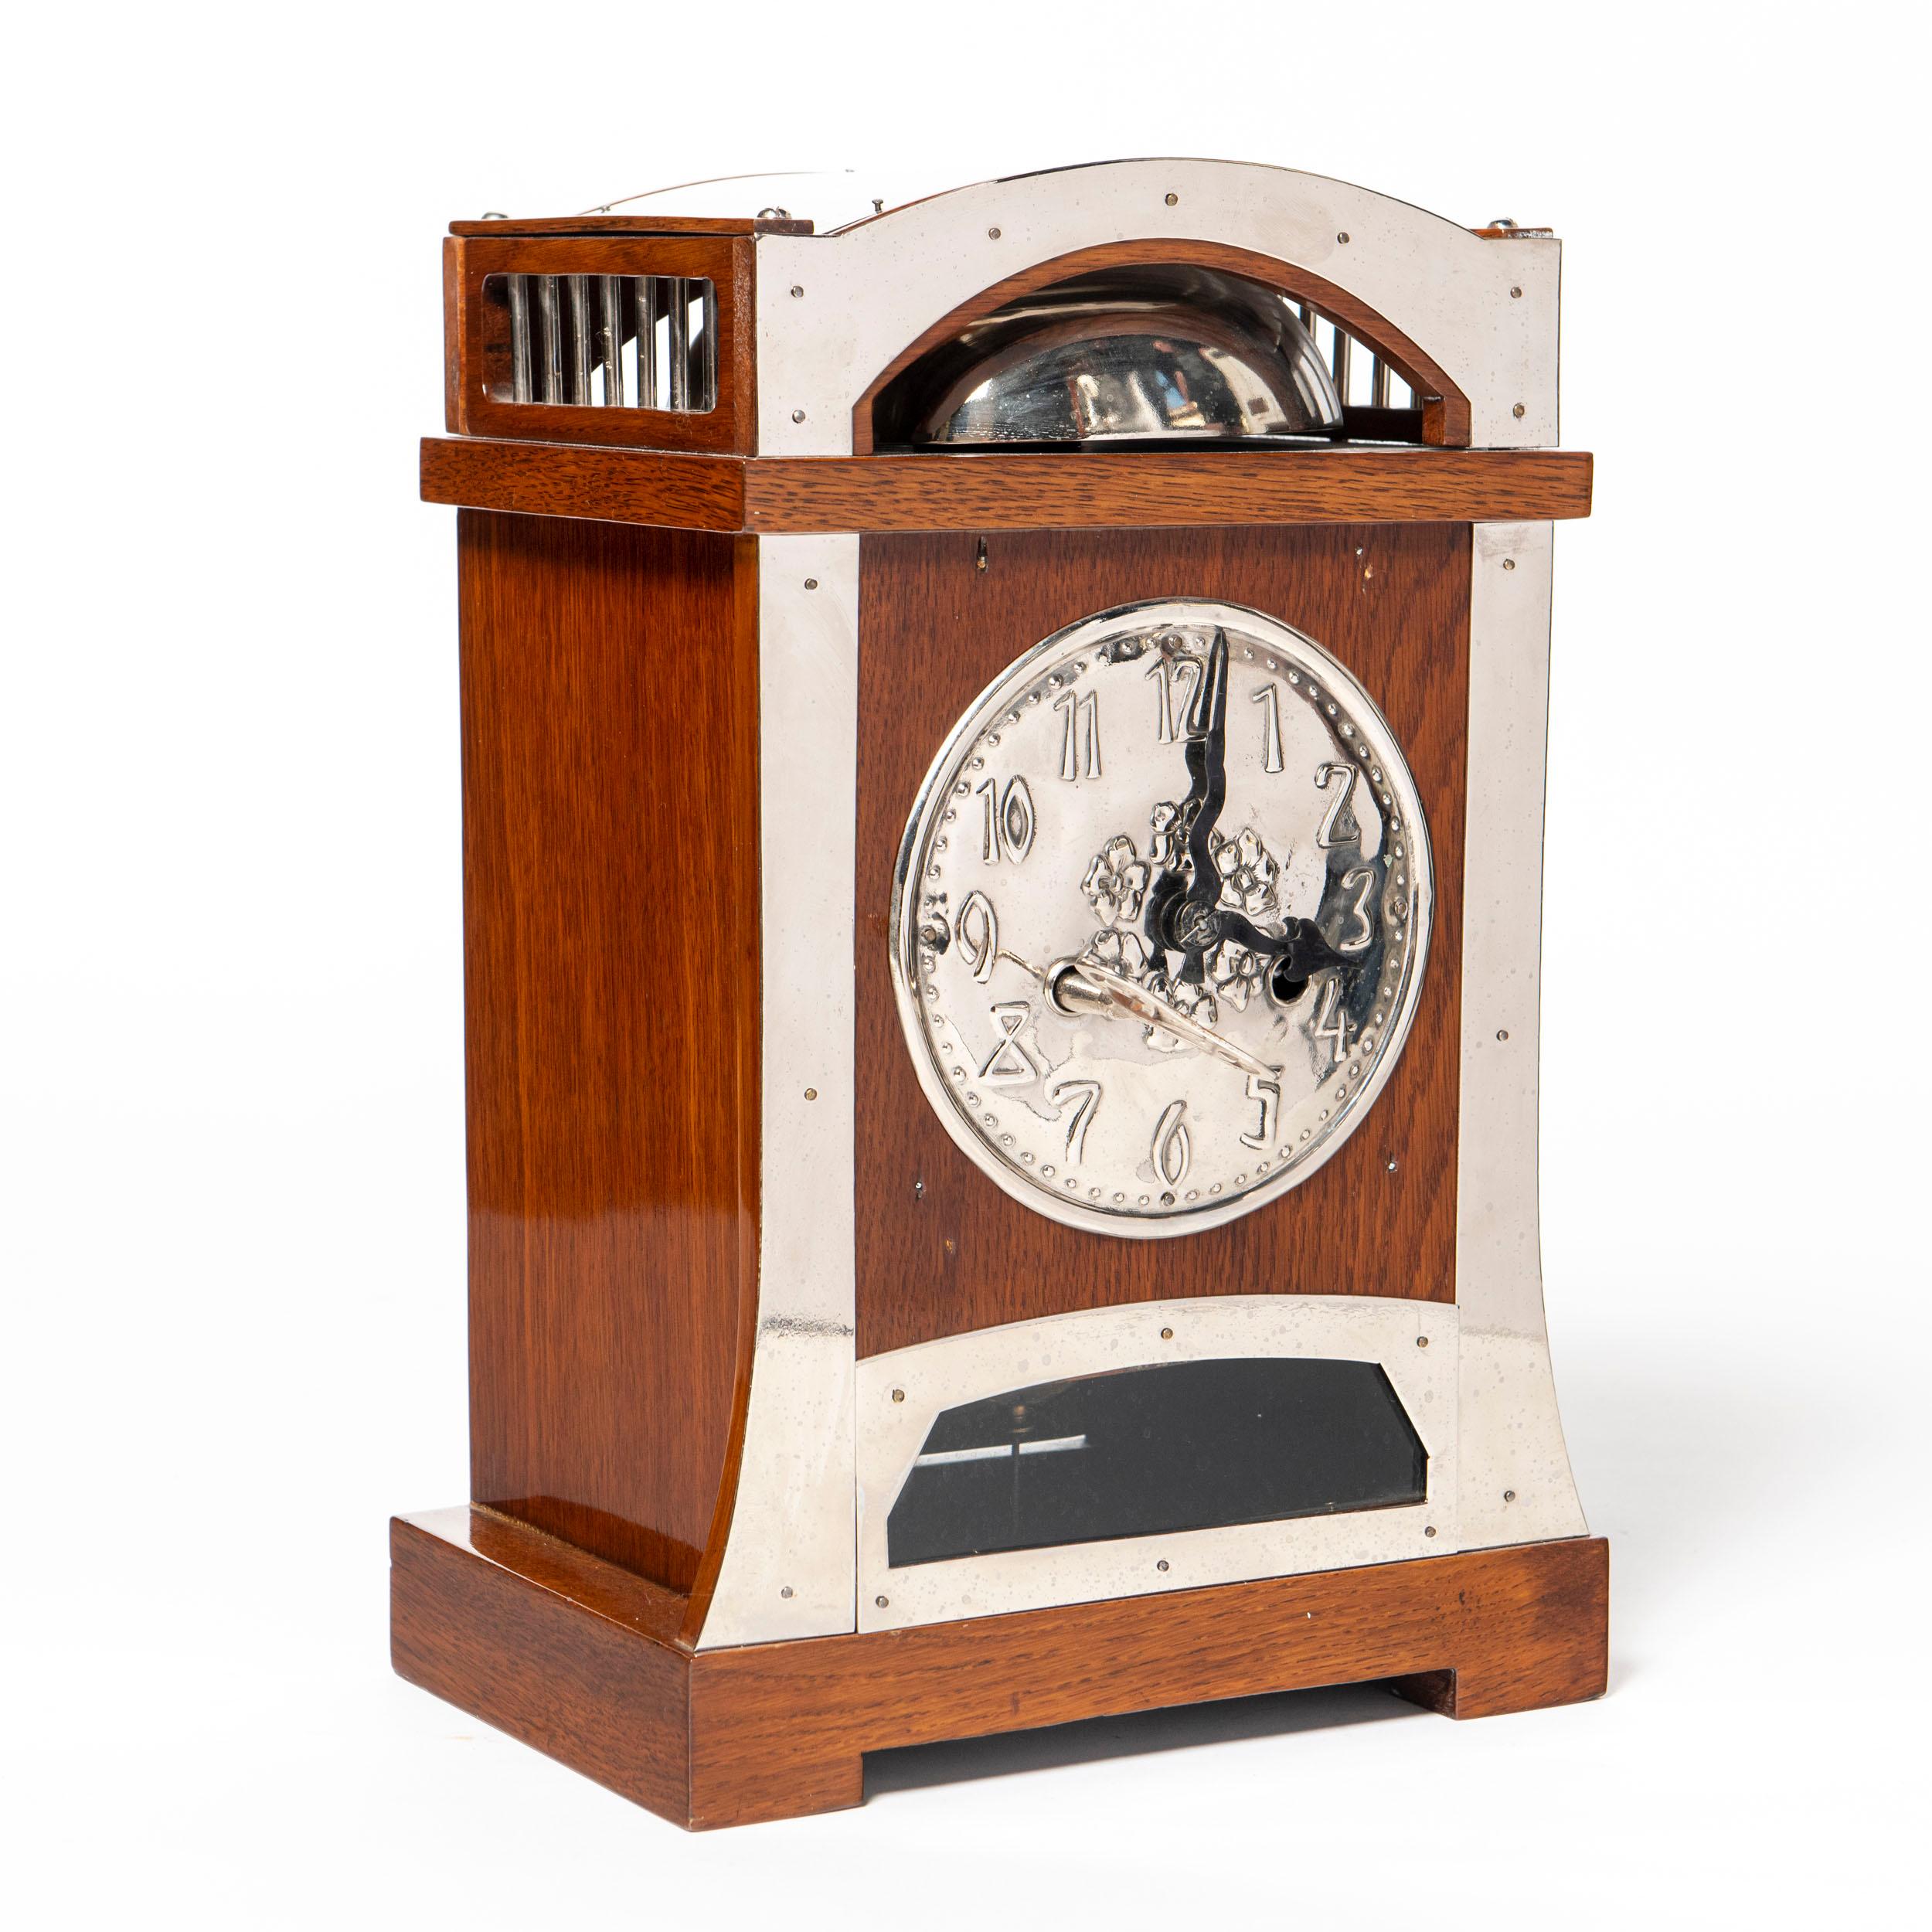 Wood and chrome table clock. Art Nouveau period, Spain, Madrid, early 20th century.
Coppel clocks manufacture.